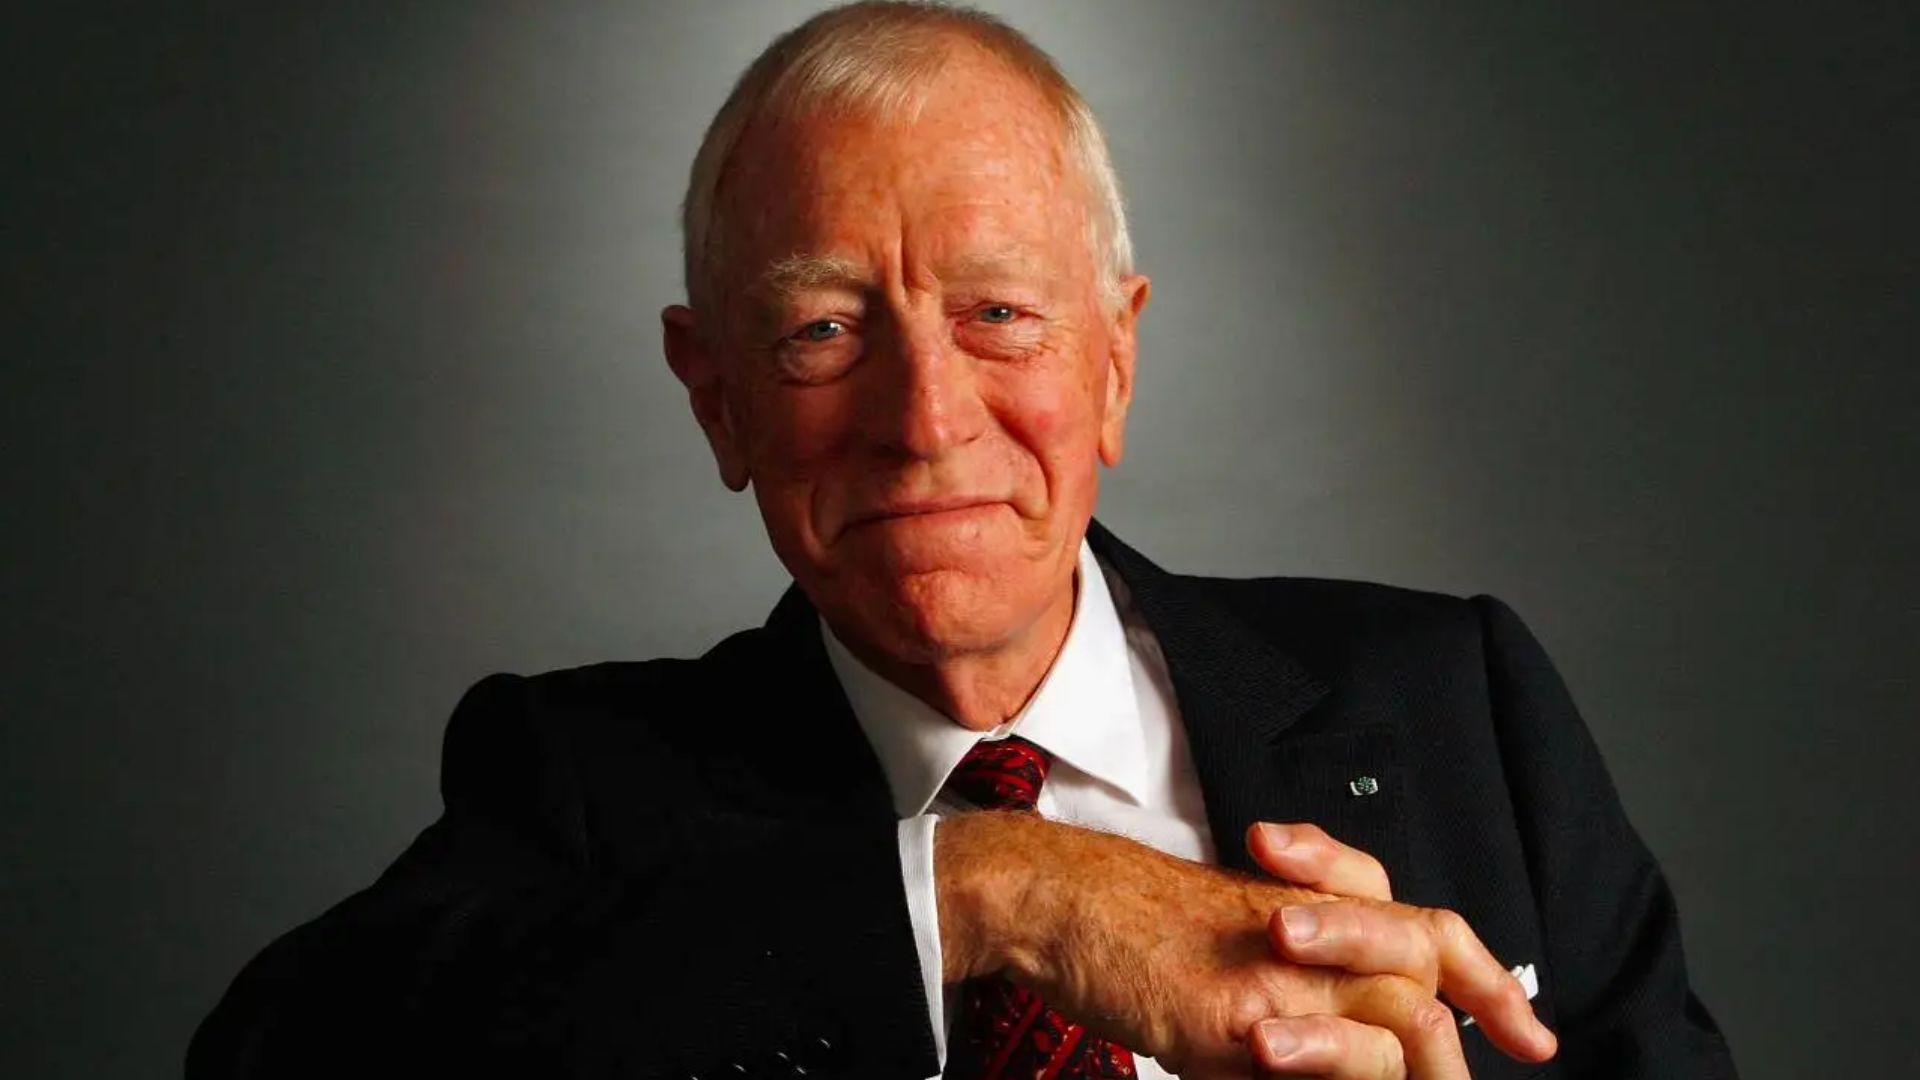 Max Von Sydow Smiling In Formal Clothing 